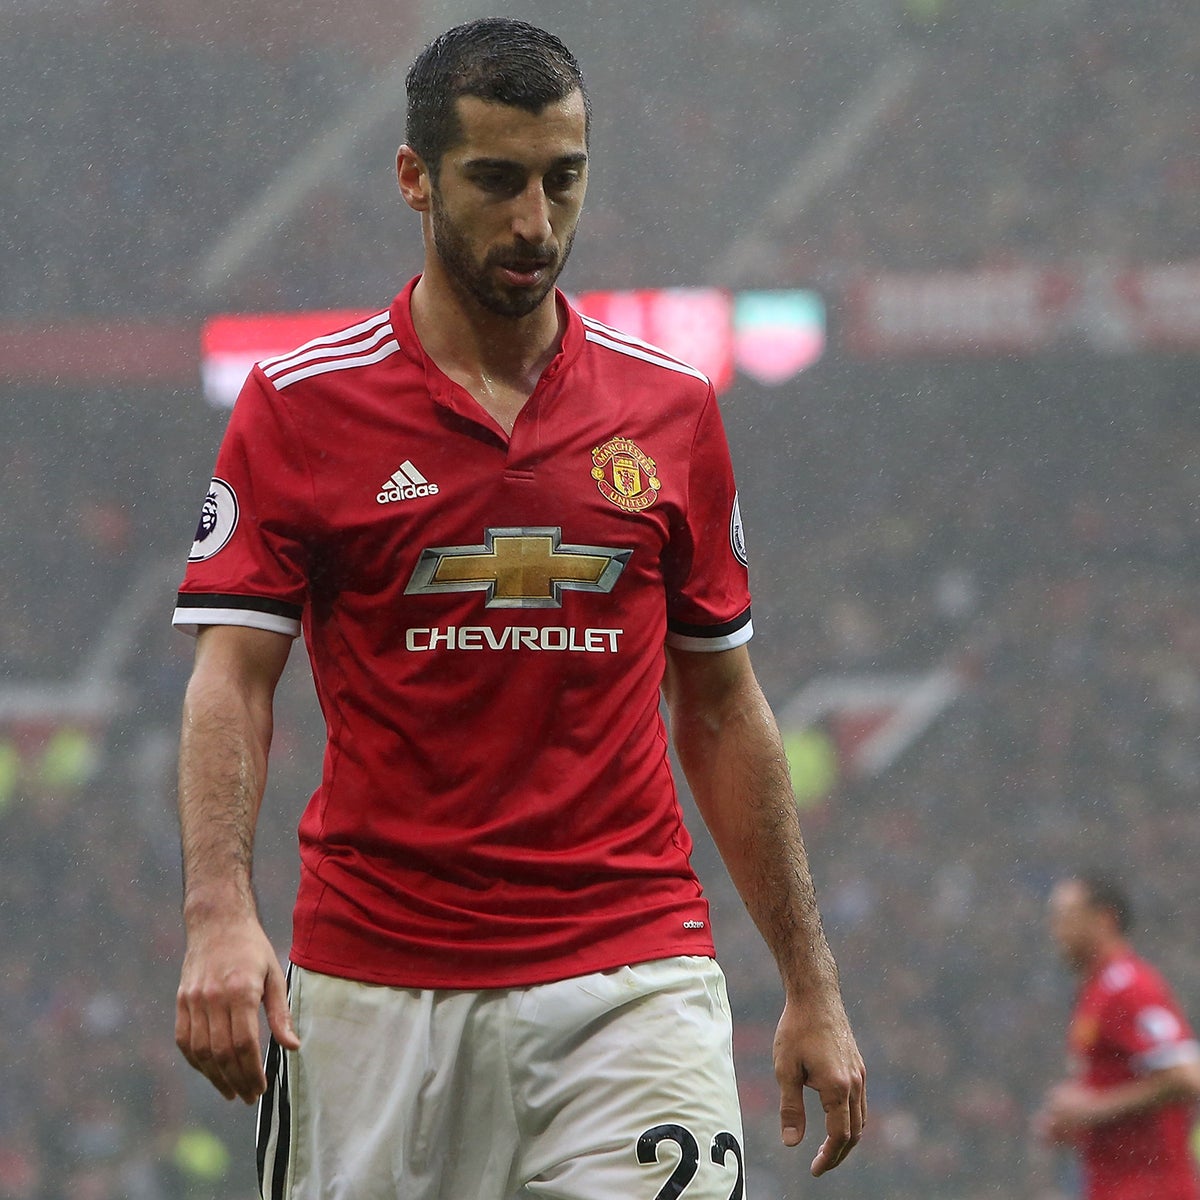 Mkhitaryan: Man Utd move not about money, they're just bigger than